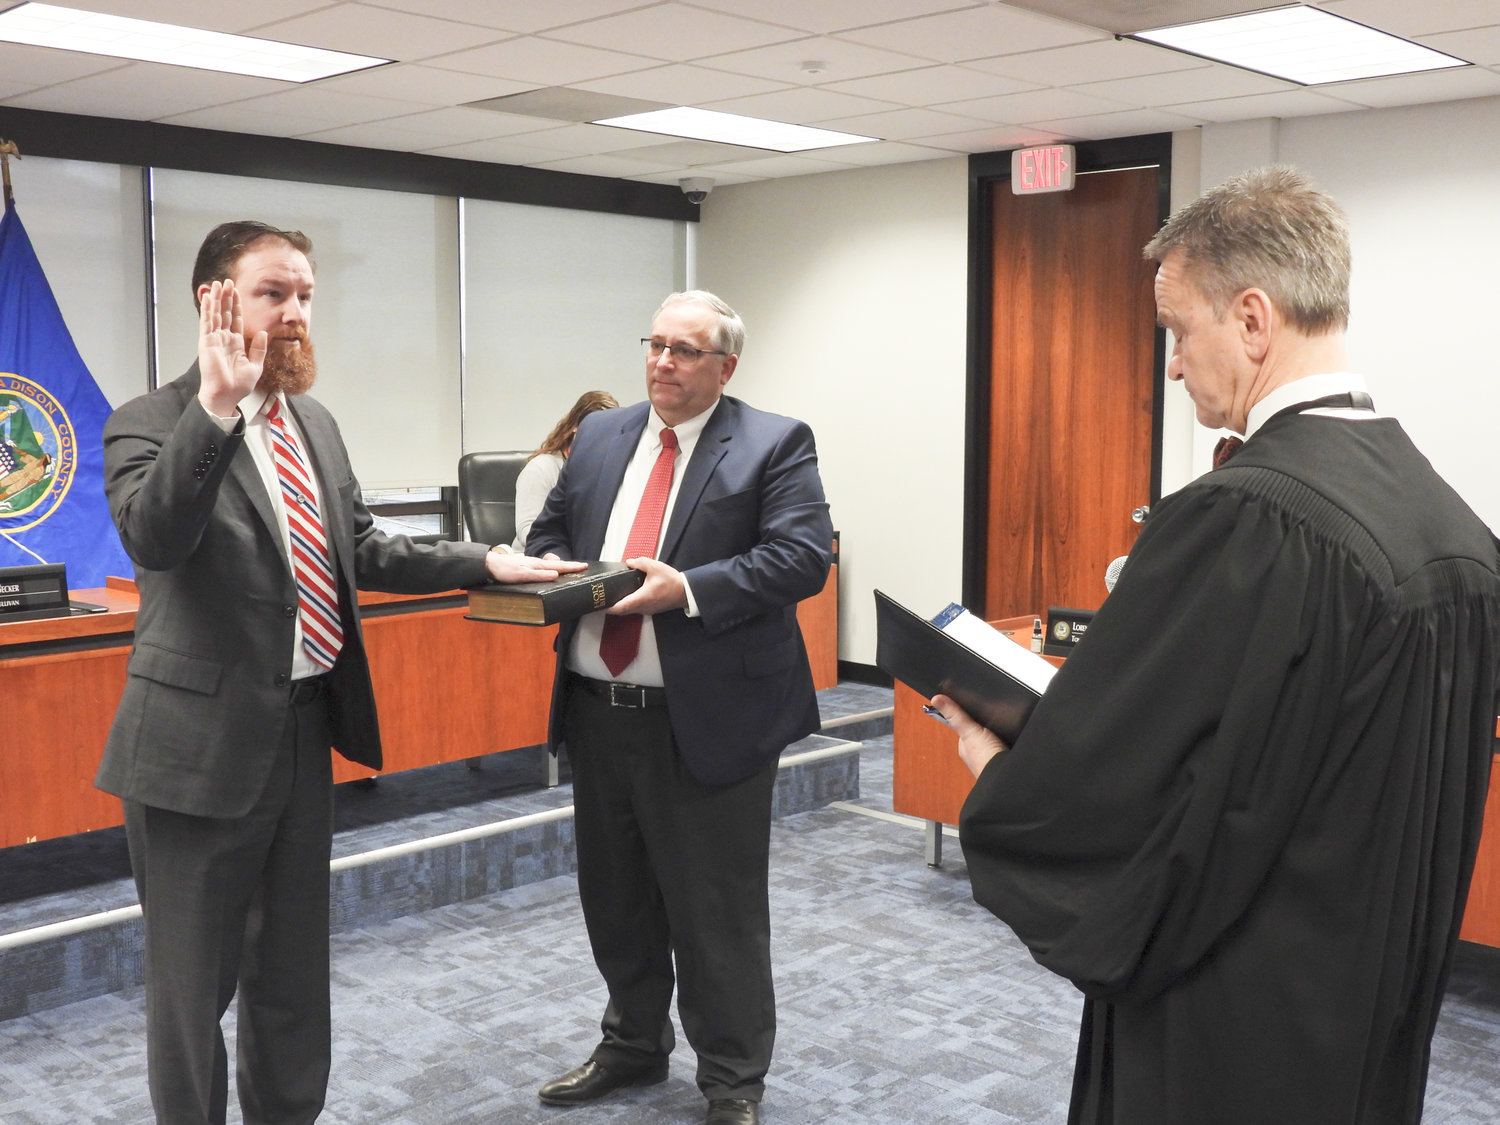 ANOTHER TERM — Michael Keville, left, is sworn in as Madison County clerk by Judge Patrick O’Sullivan, who was recently elected as a justice of the supreme court for the 6th Judicial District. Madison County Chairman John Becker holds the Bible.